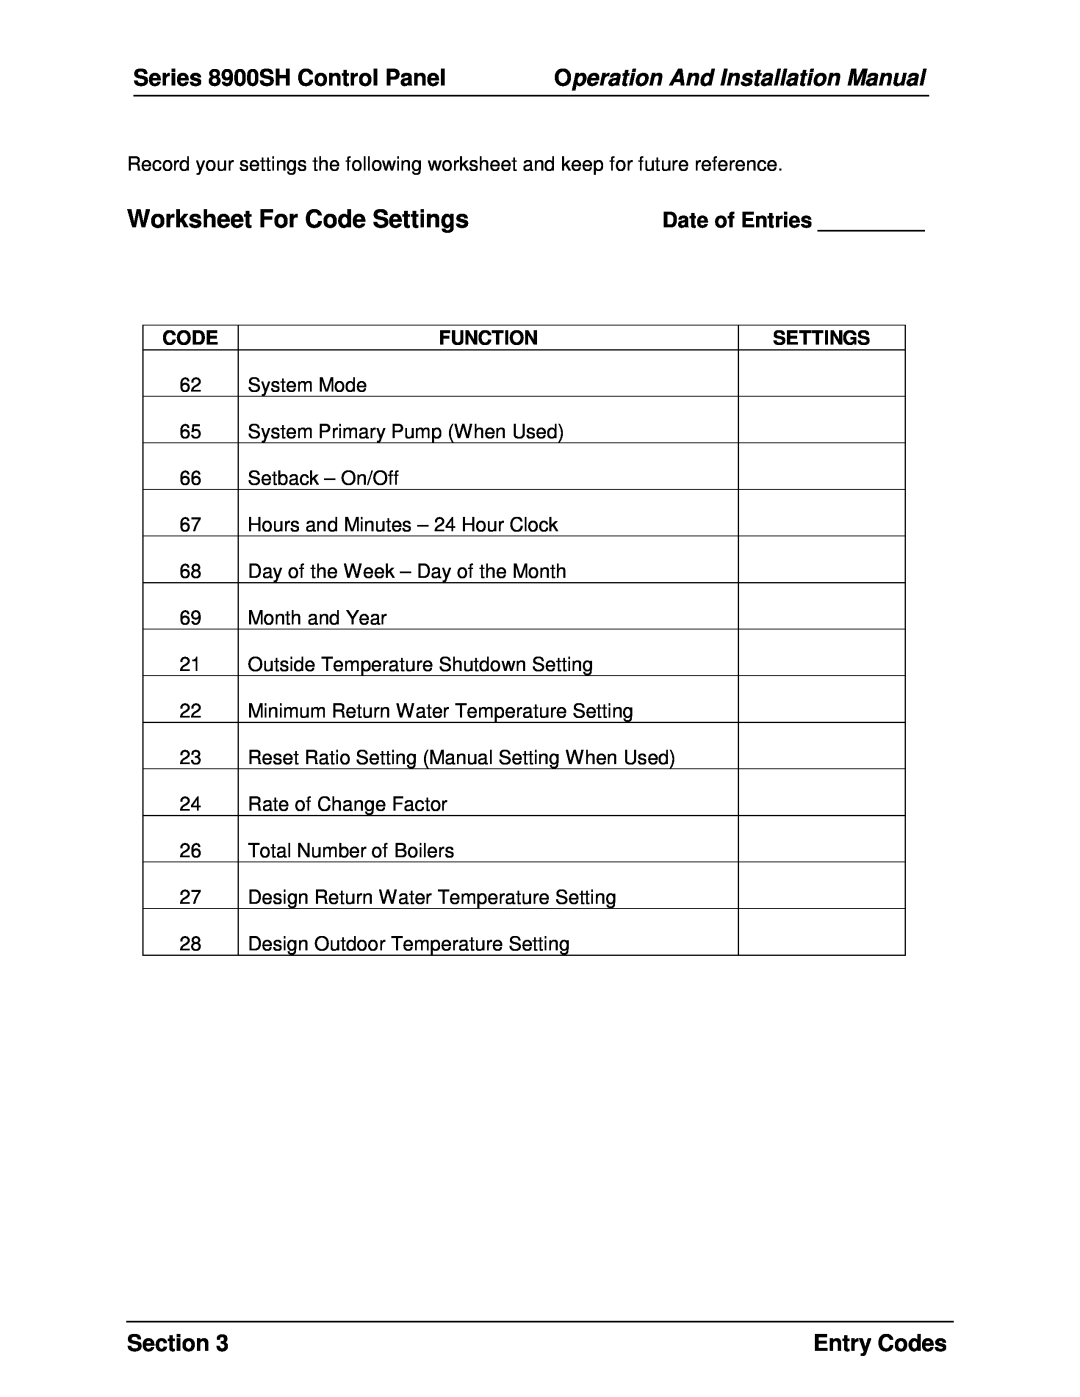 Panasonic 8900 SH Worksheet For Code Settings, Date of Entries, Series 8900SH Control Panel, Section, Entry Codes 